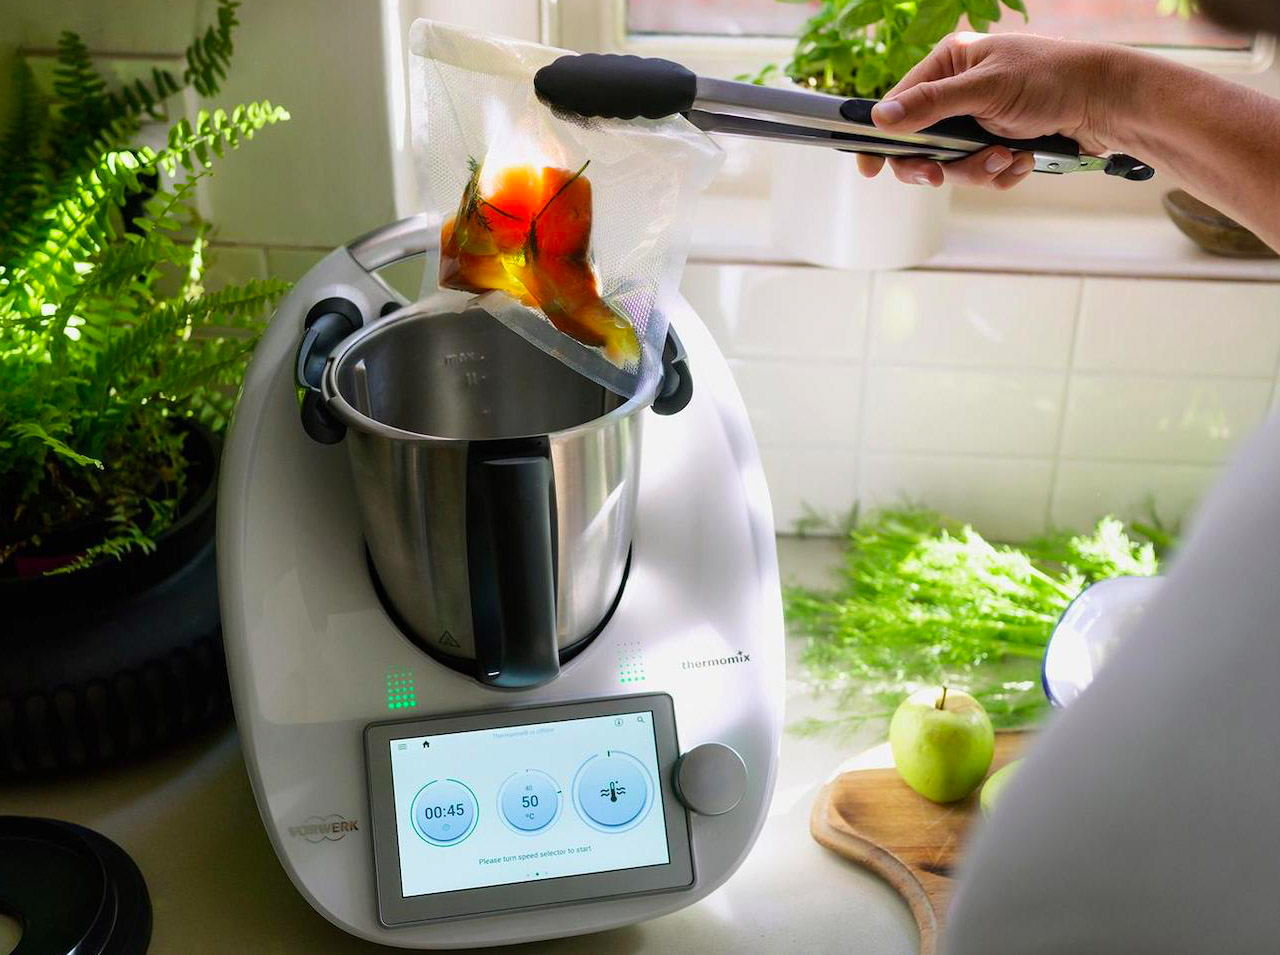 Kitchen Appliances And Gadgets We Love During Quarantine